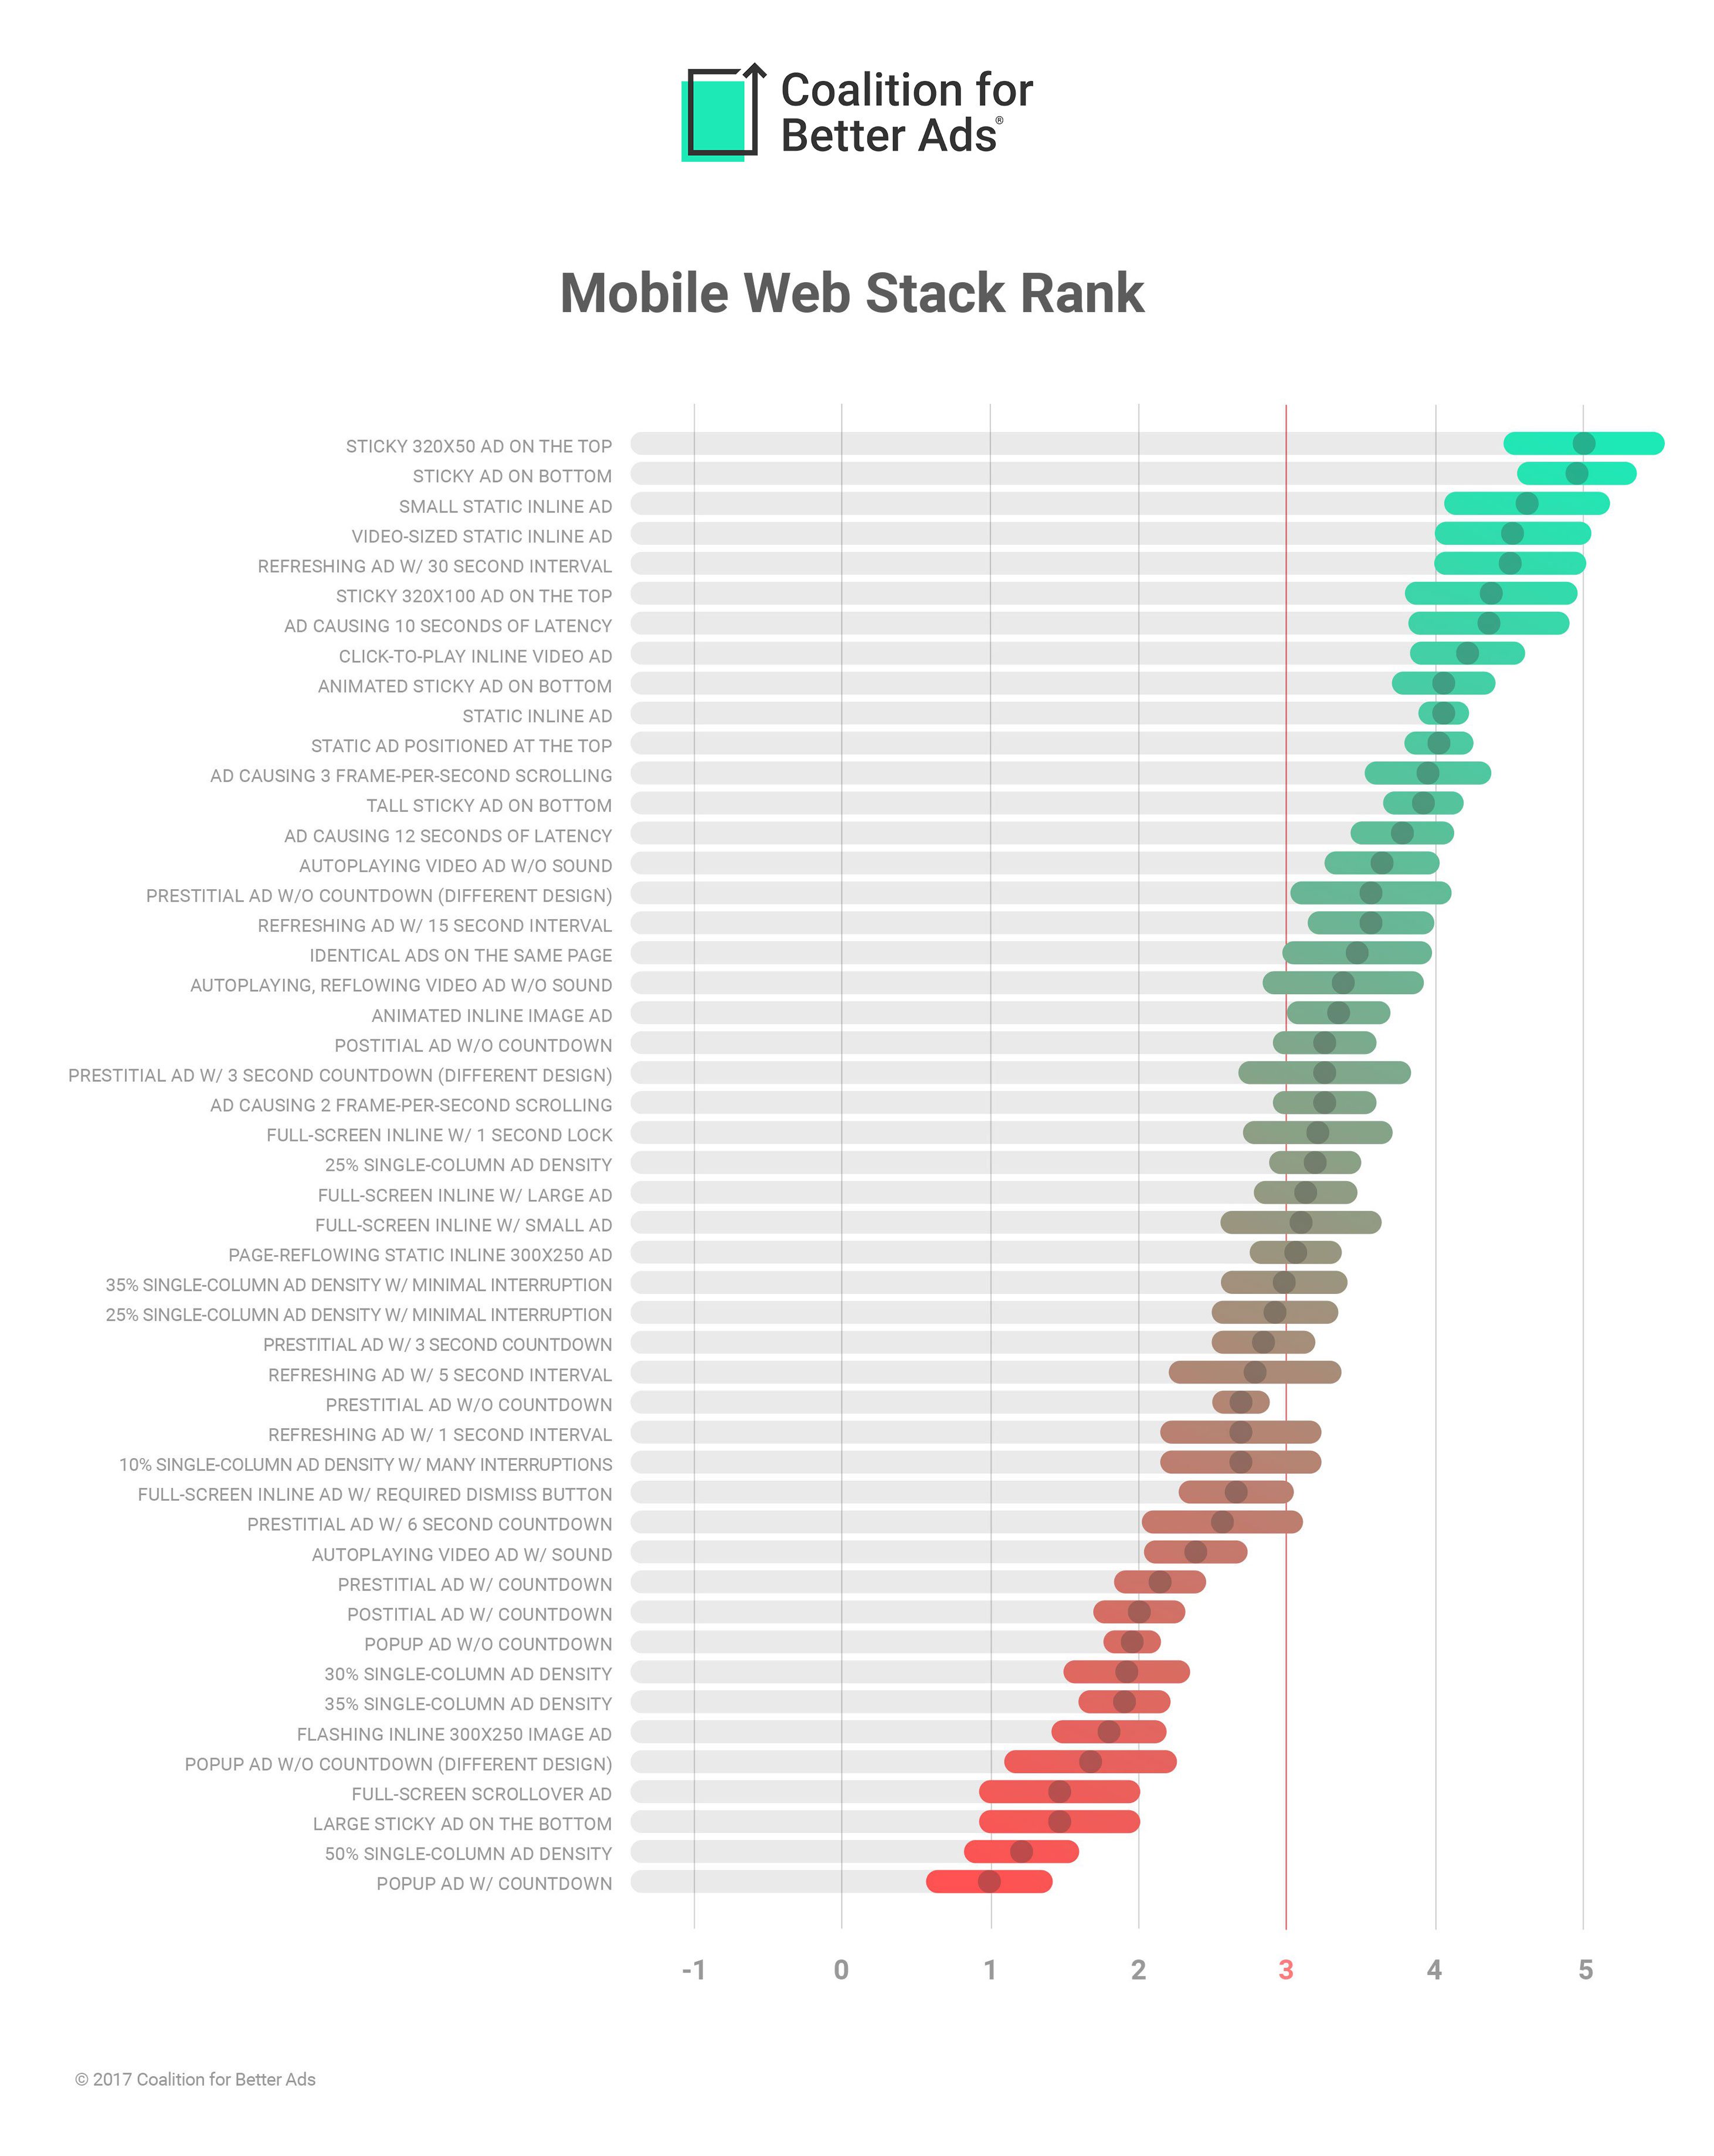 Mobile-Web-Ad-Experiences-Ranking-02-18